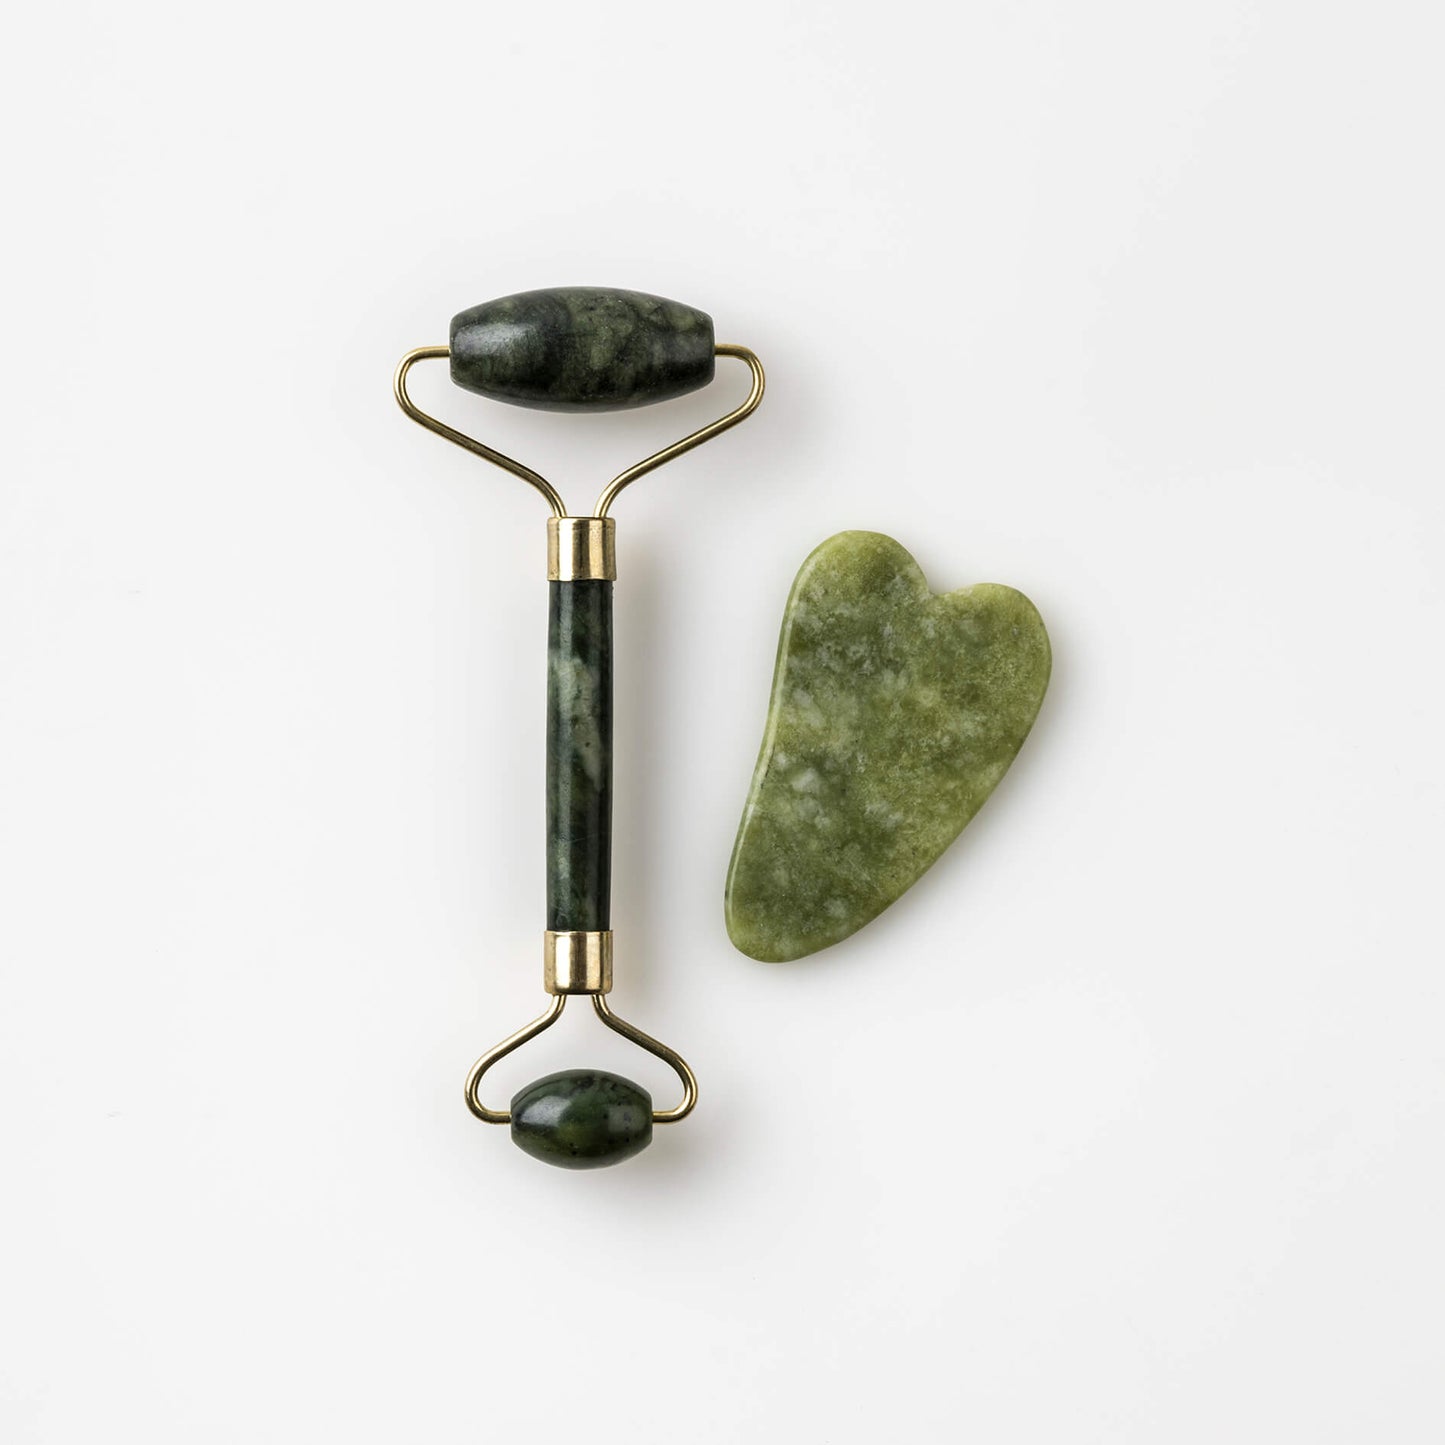 A Bristolmade jade roller and gua sha set, featuring smooth green jade rollers with gold coloured fittings and a matching jade gua sha tool, both designed for facial massage and skincare.